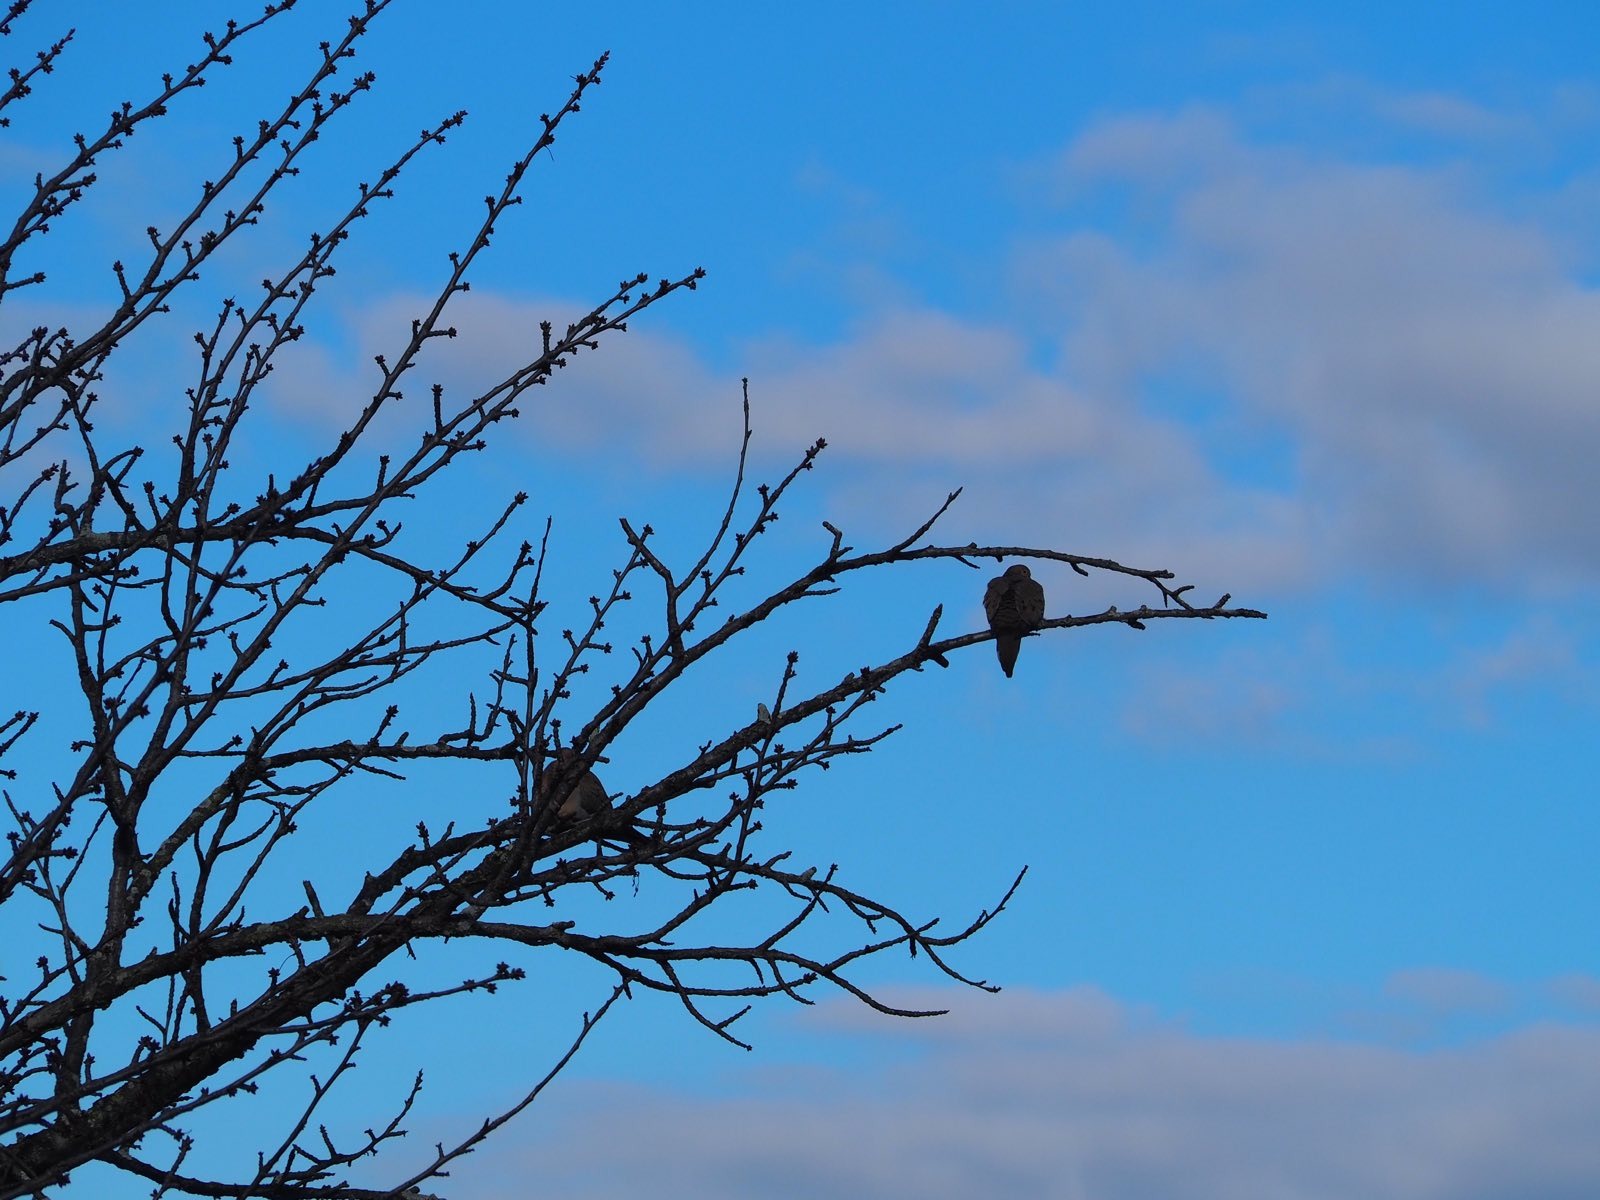 A bird perched in a bare tree against a blue sky.